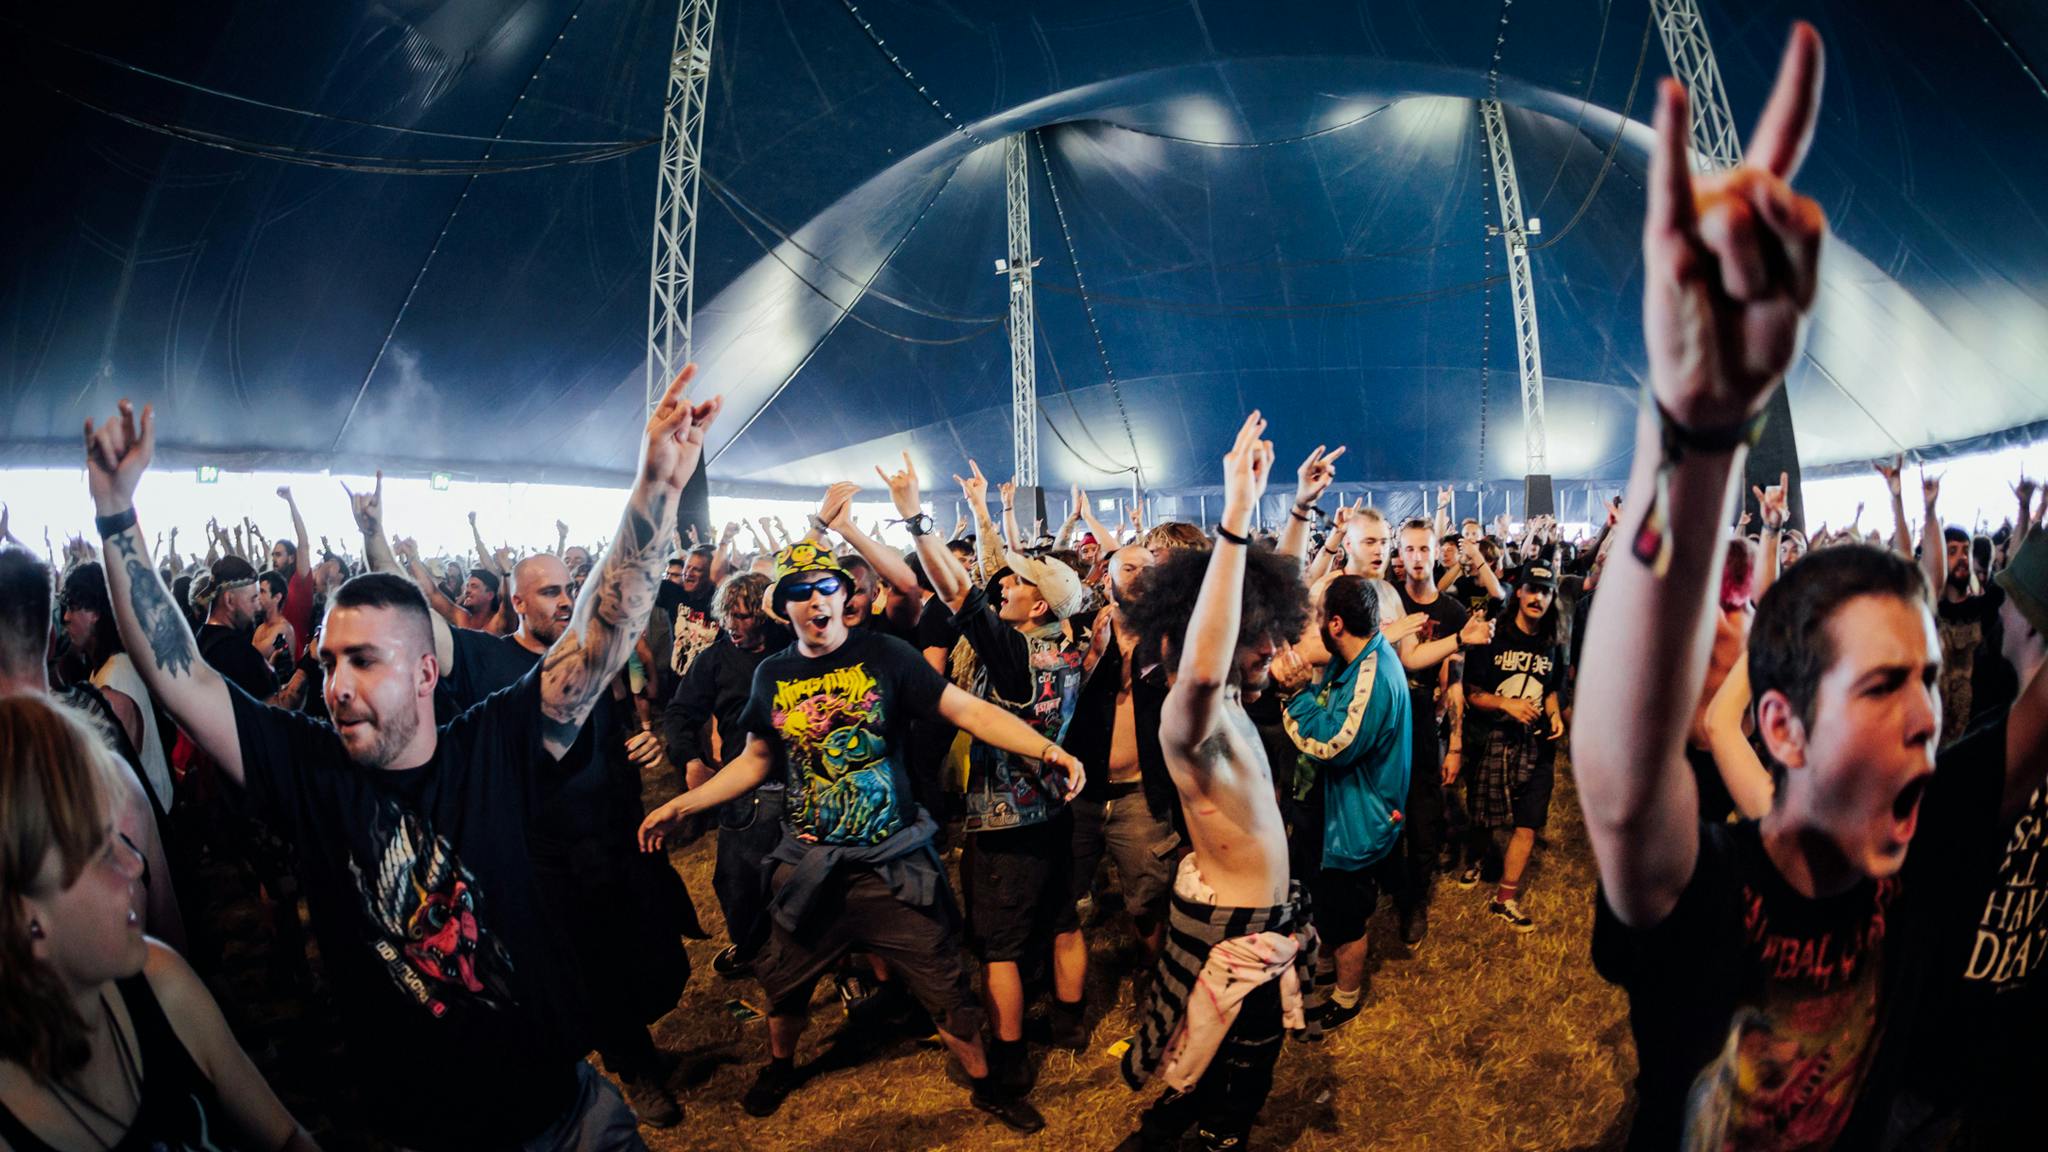 Investigation launched as local council boss says Download Festival traffic was “absolute disaster”